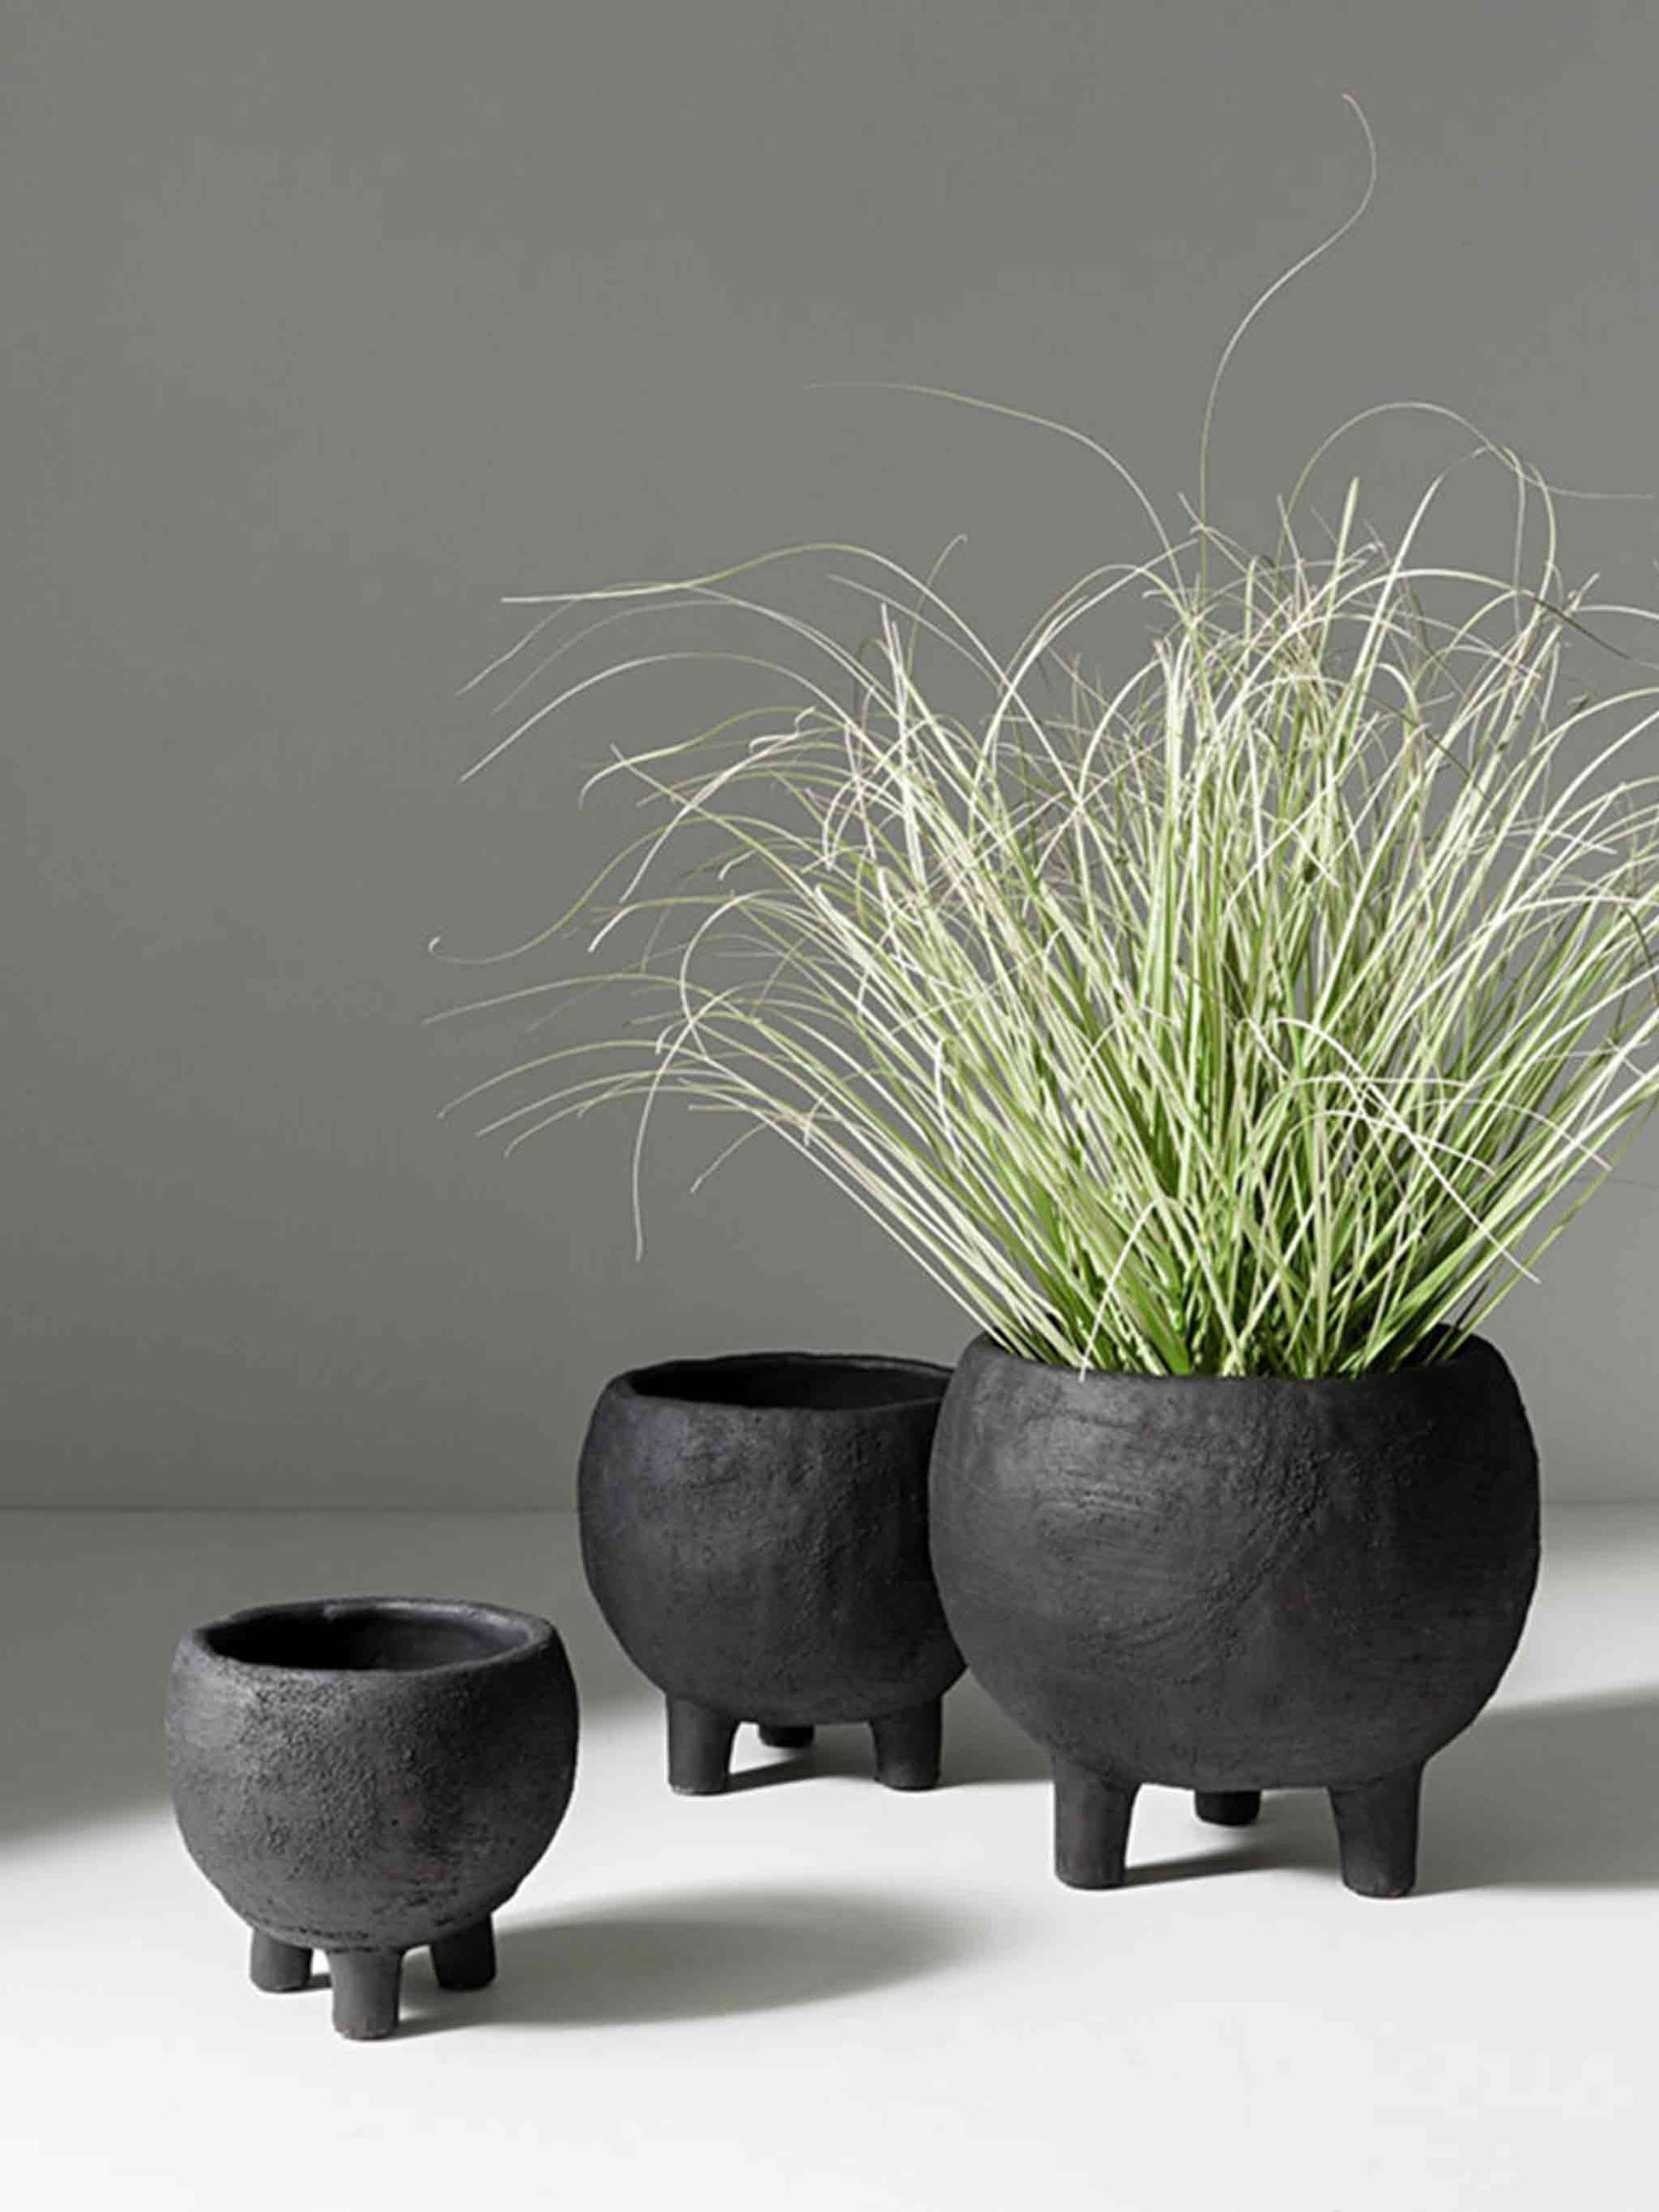 Niro Short Black Dome Pot with Standing Legs – Small